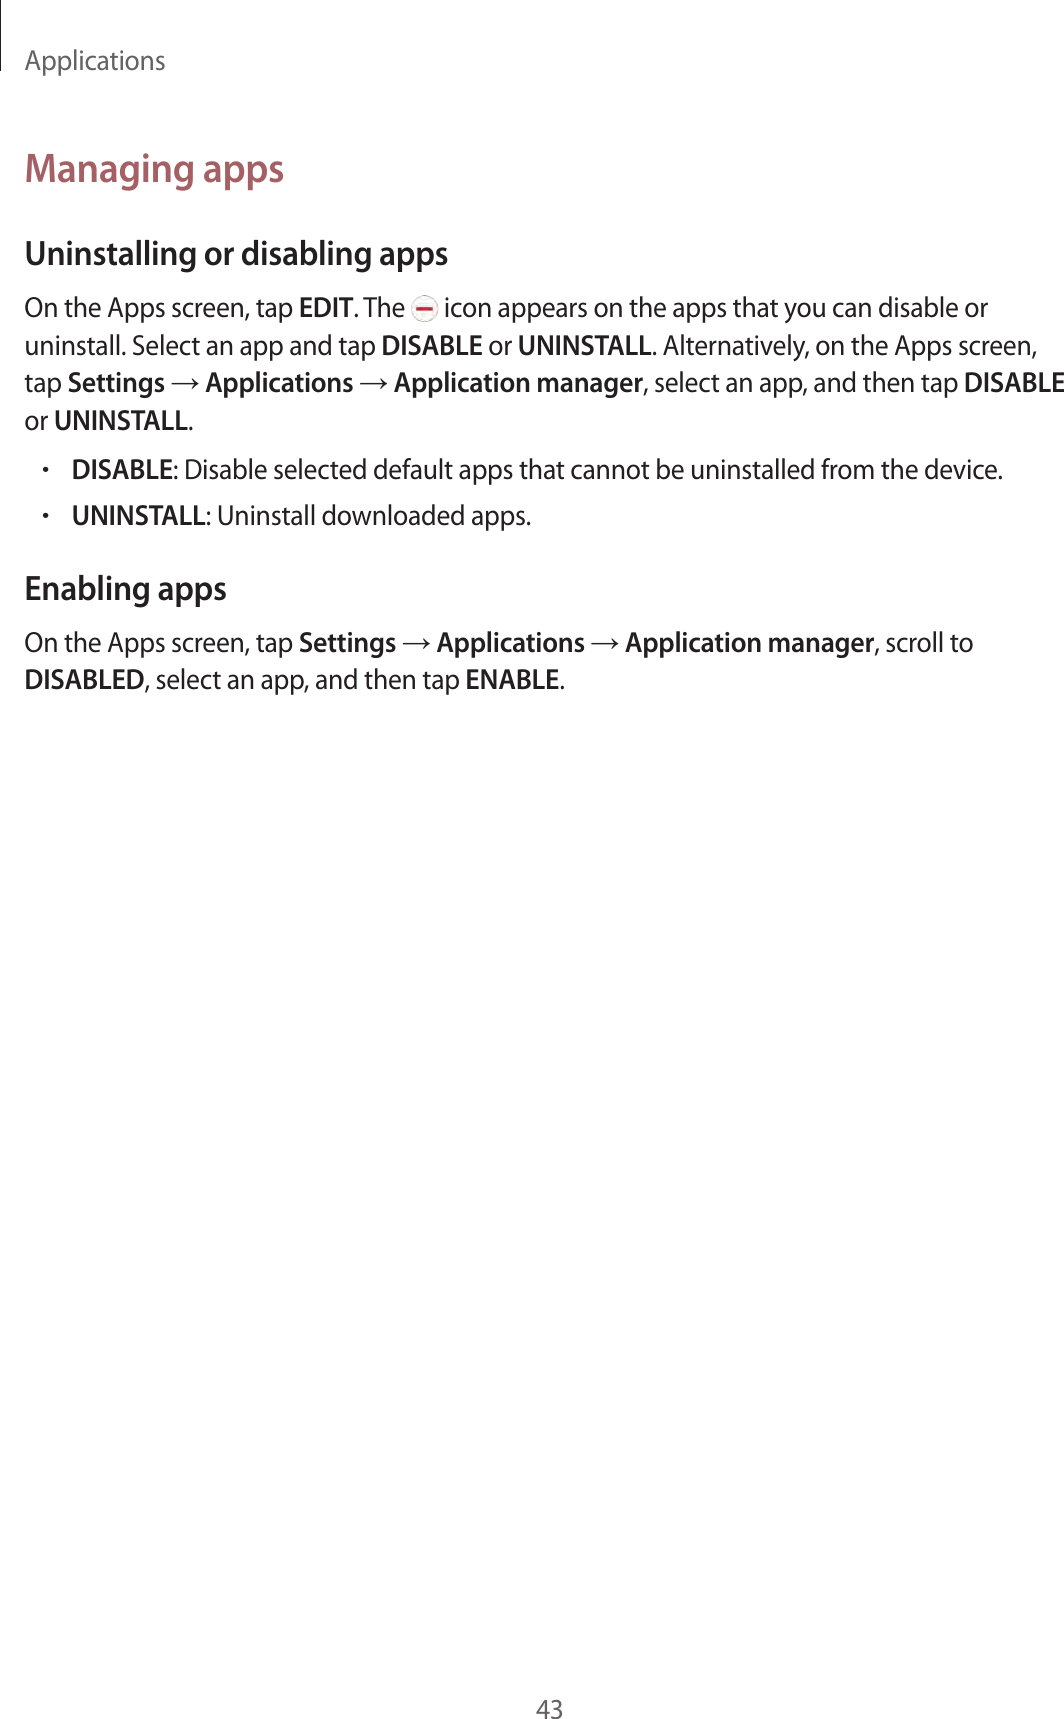 Applications43Managing appsUninstalling or disabling appsOn the Apps screen, tap EDIT. The   icon appears on the apps that you can disable or uninstall. Select an app and tap DISABLE or UNINSTALL. Alternatively, on the Apps screen, tap Settings → Applications → Application manager, select an app, and then tap DISABLE or UNINSTALL.•DISABLE: Disable selected default apps that cannot be uninstalled from the device.•UNINSTALL: Uninstall downloaded apps.Enabling appsOn the Apps screen, tap Settings → Applications → Application manager, scroll to DISABLED, select an app, and then tap ENABLE.